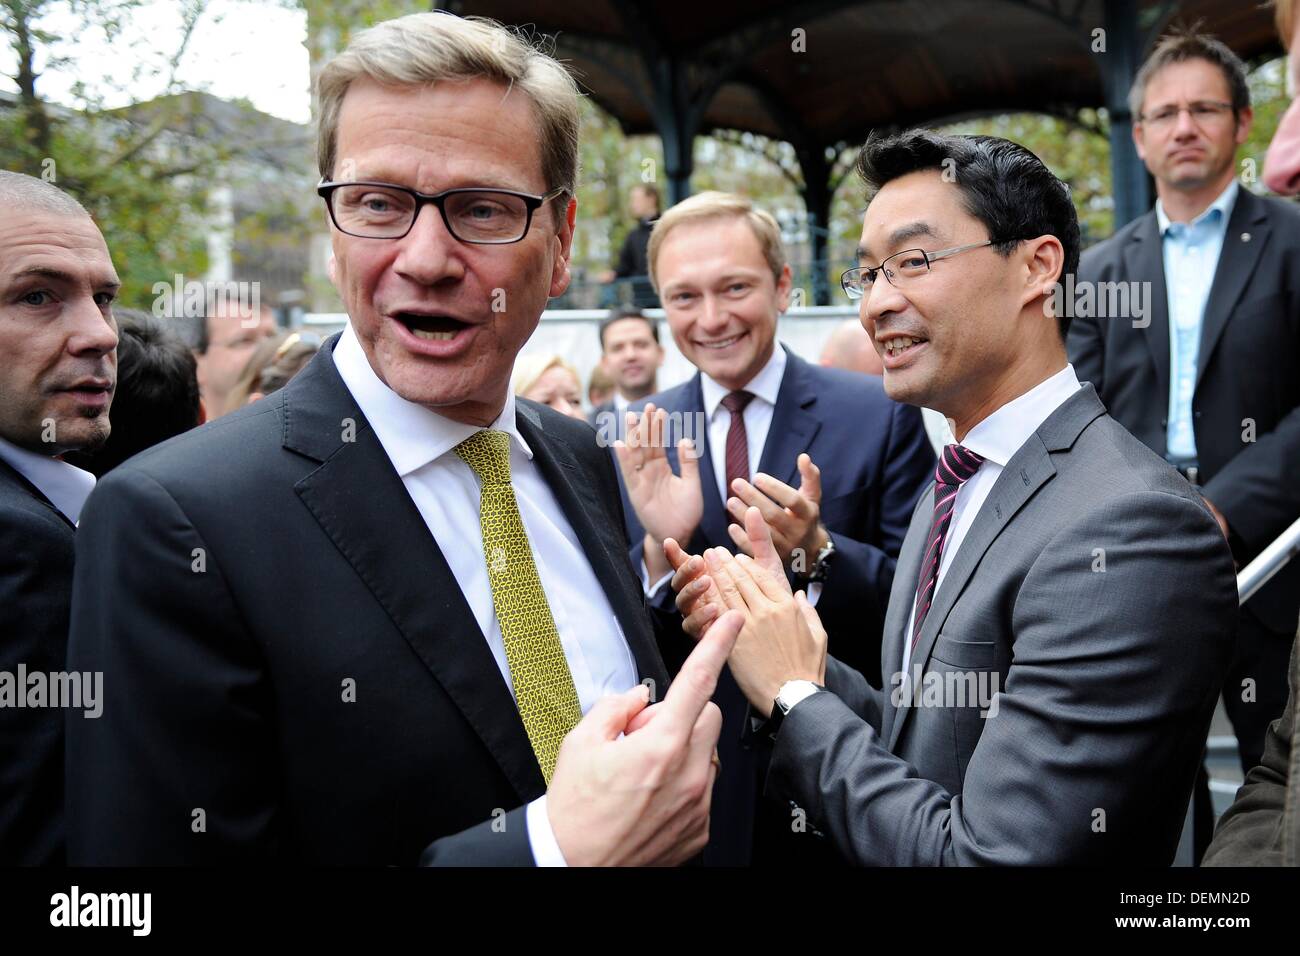 Duesseldorf, Germany. 21st Sep, 2013. Federal Foreign Minister Guido Westerwelle (L), chairman of North Rhine-Westphalia (C) Christian Lindner and Federal chairman Philipp Roesler (R), all members of the Free Democratic Party (FDP) stand together at the nationwide closing rally of the FDP in Duesseldorf, Germany, 21 September 2013. Photo: MARIUS BECKER/dpa/Alamy Live News Stock Photo